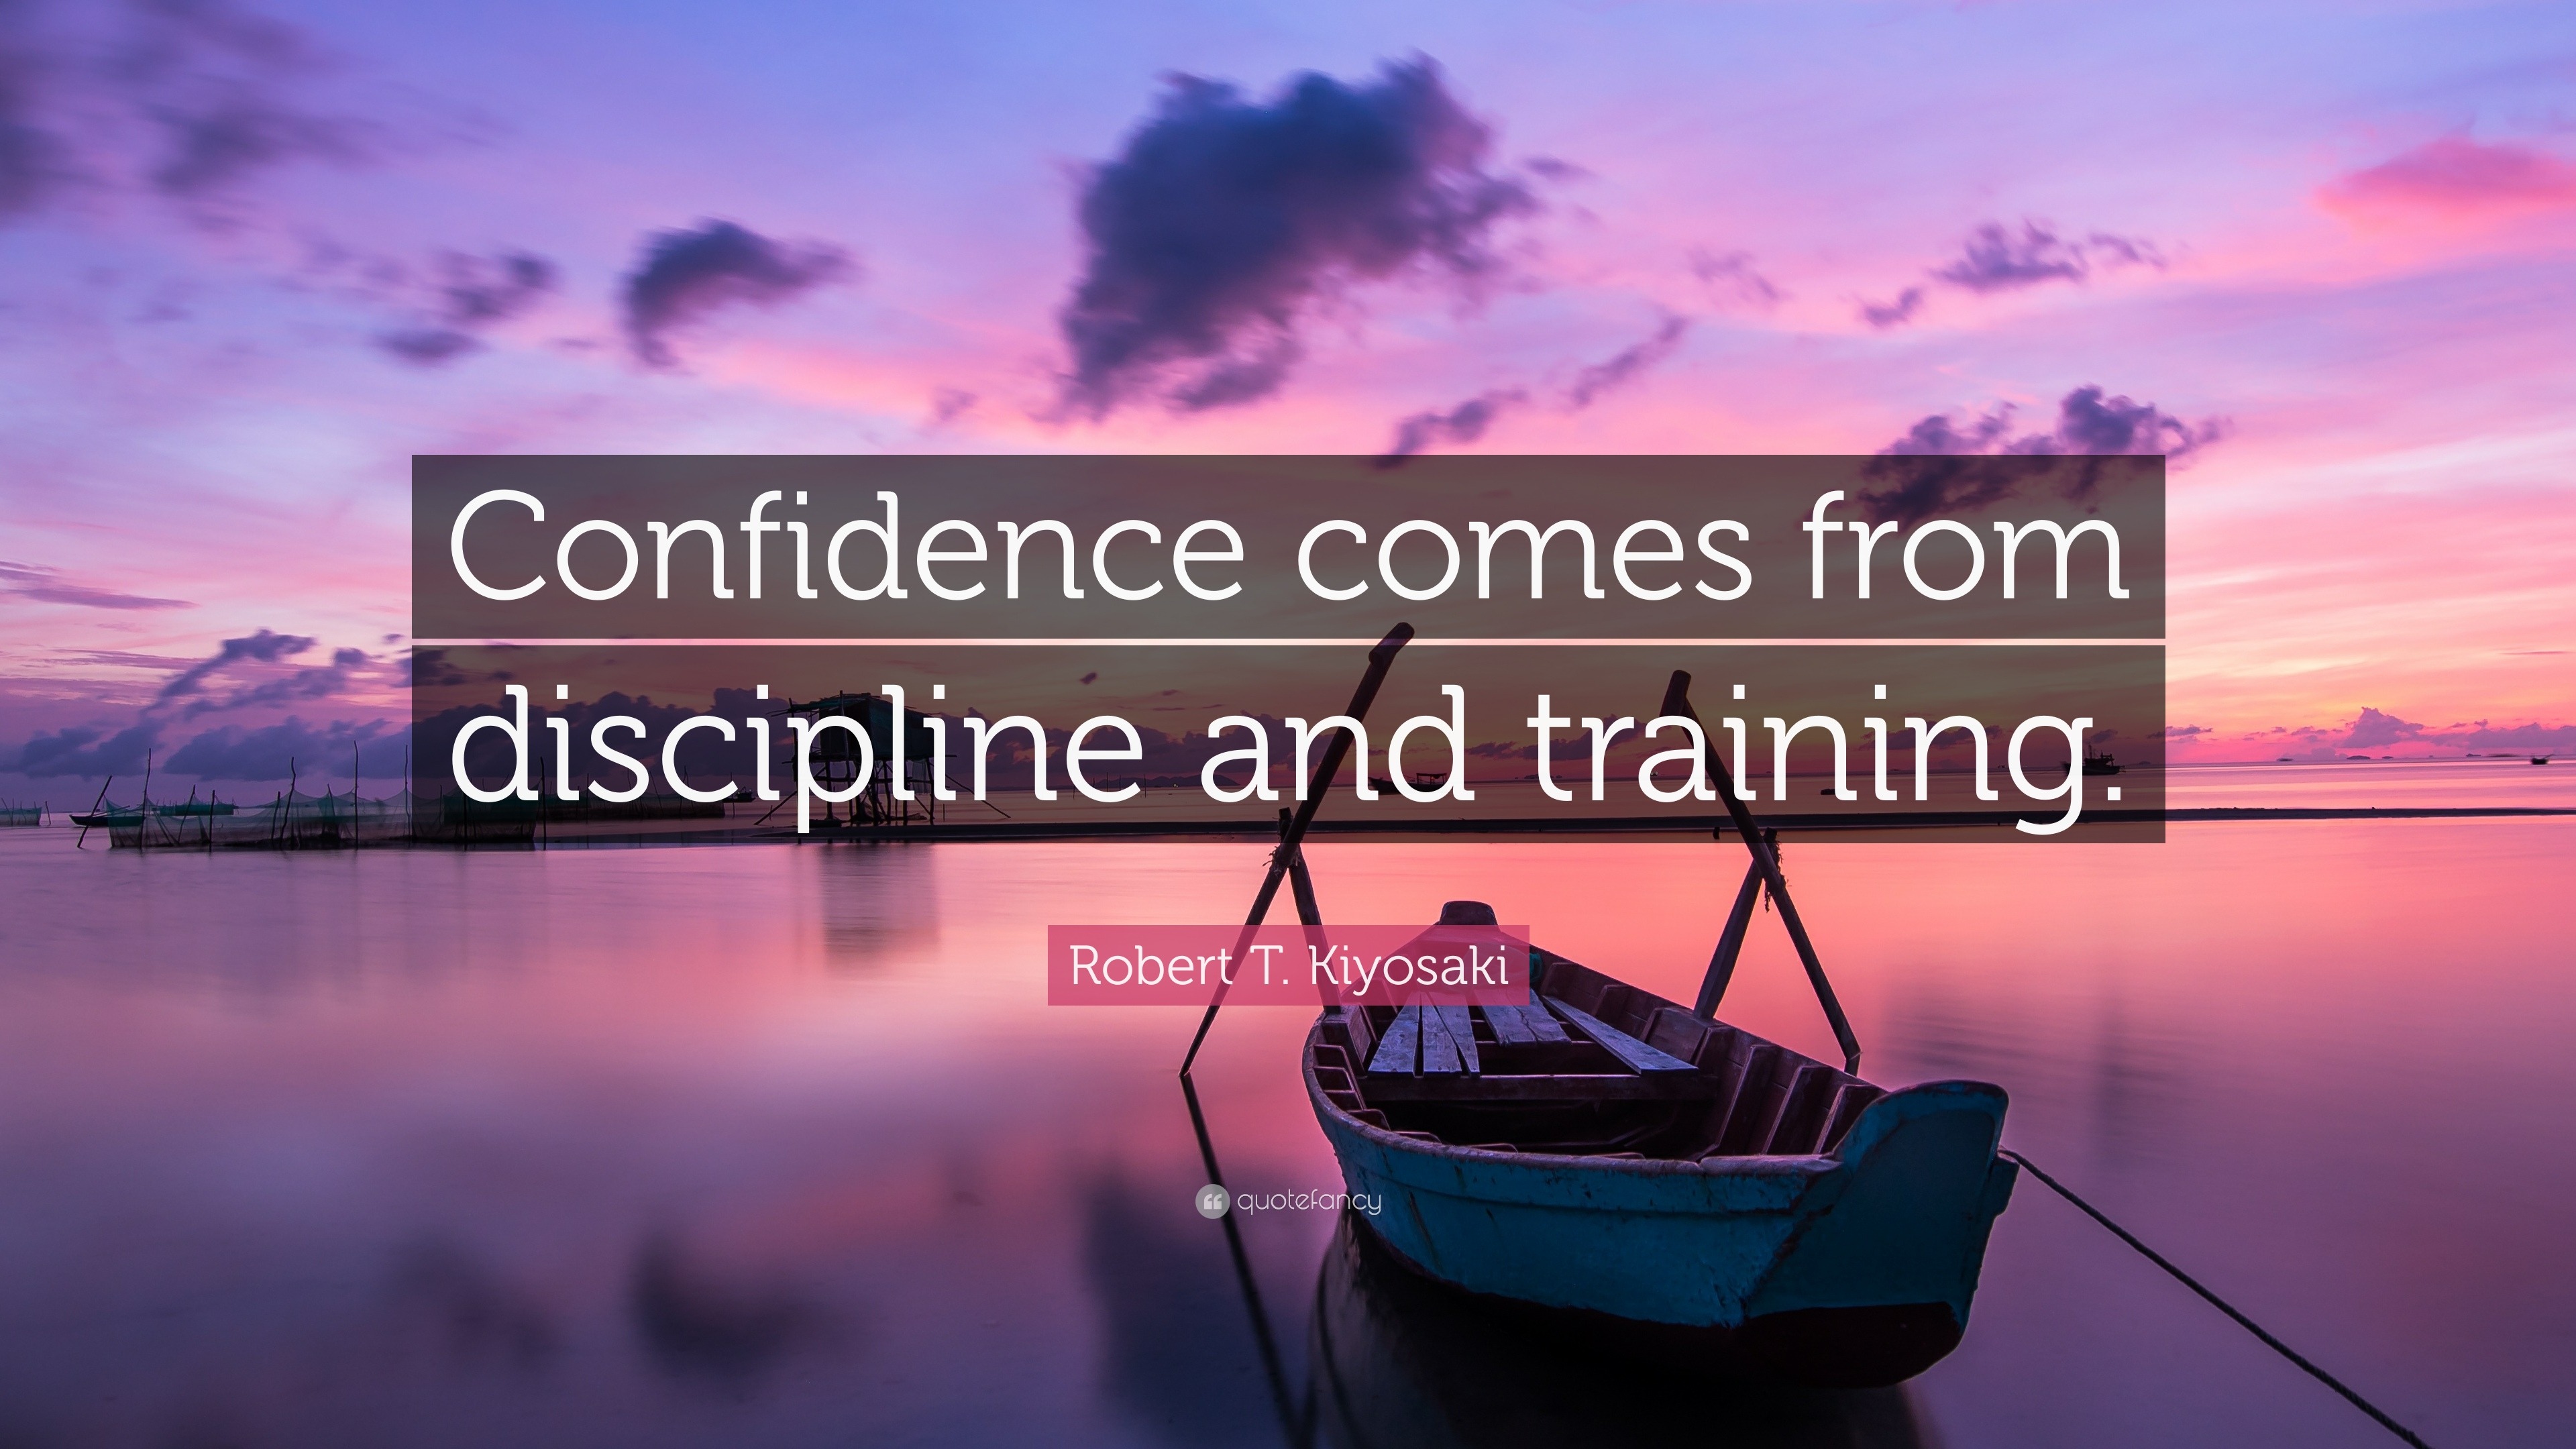 Robert T. Kiyosaki Quote “Confidence comes from